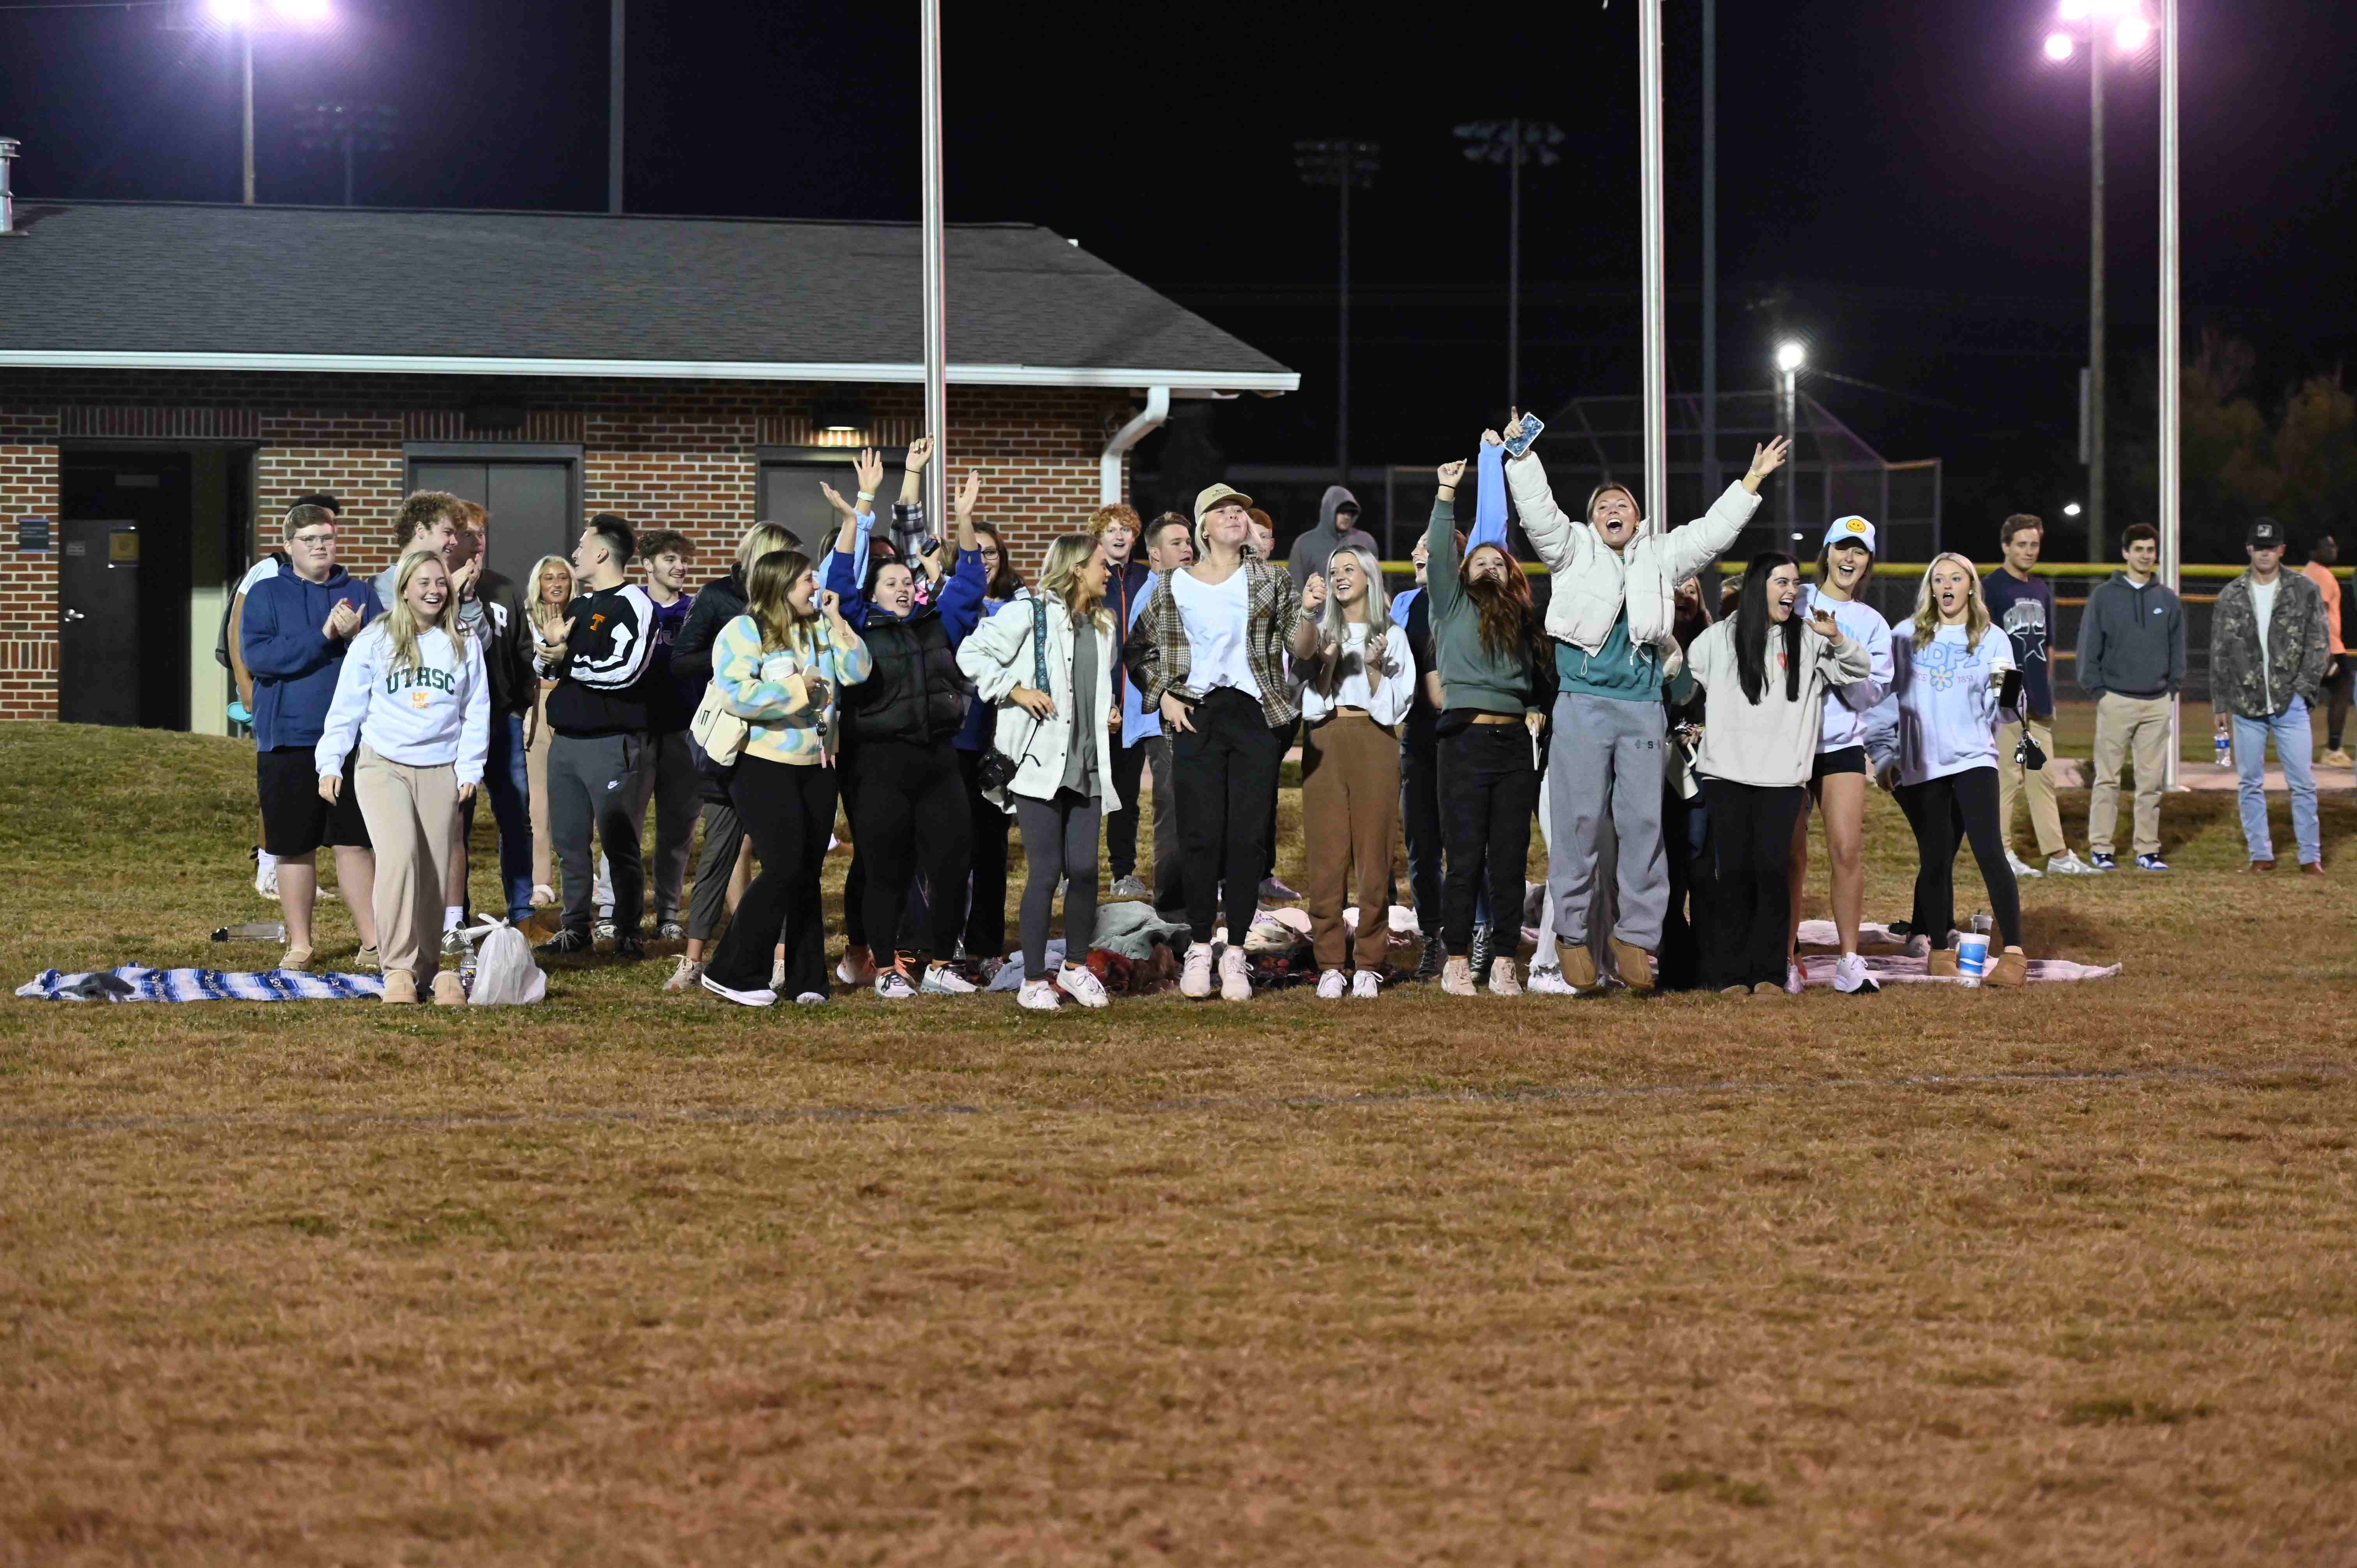 Students cheering during a flag football game.